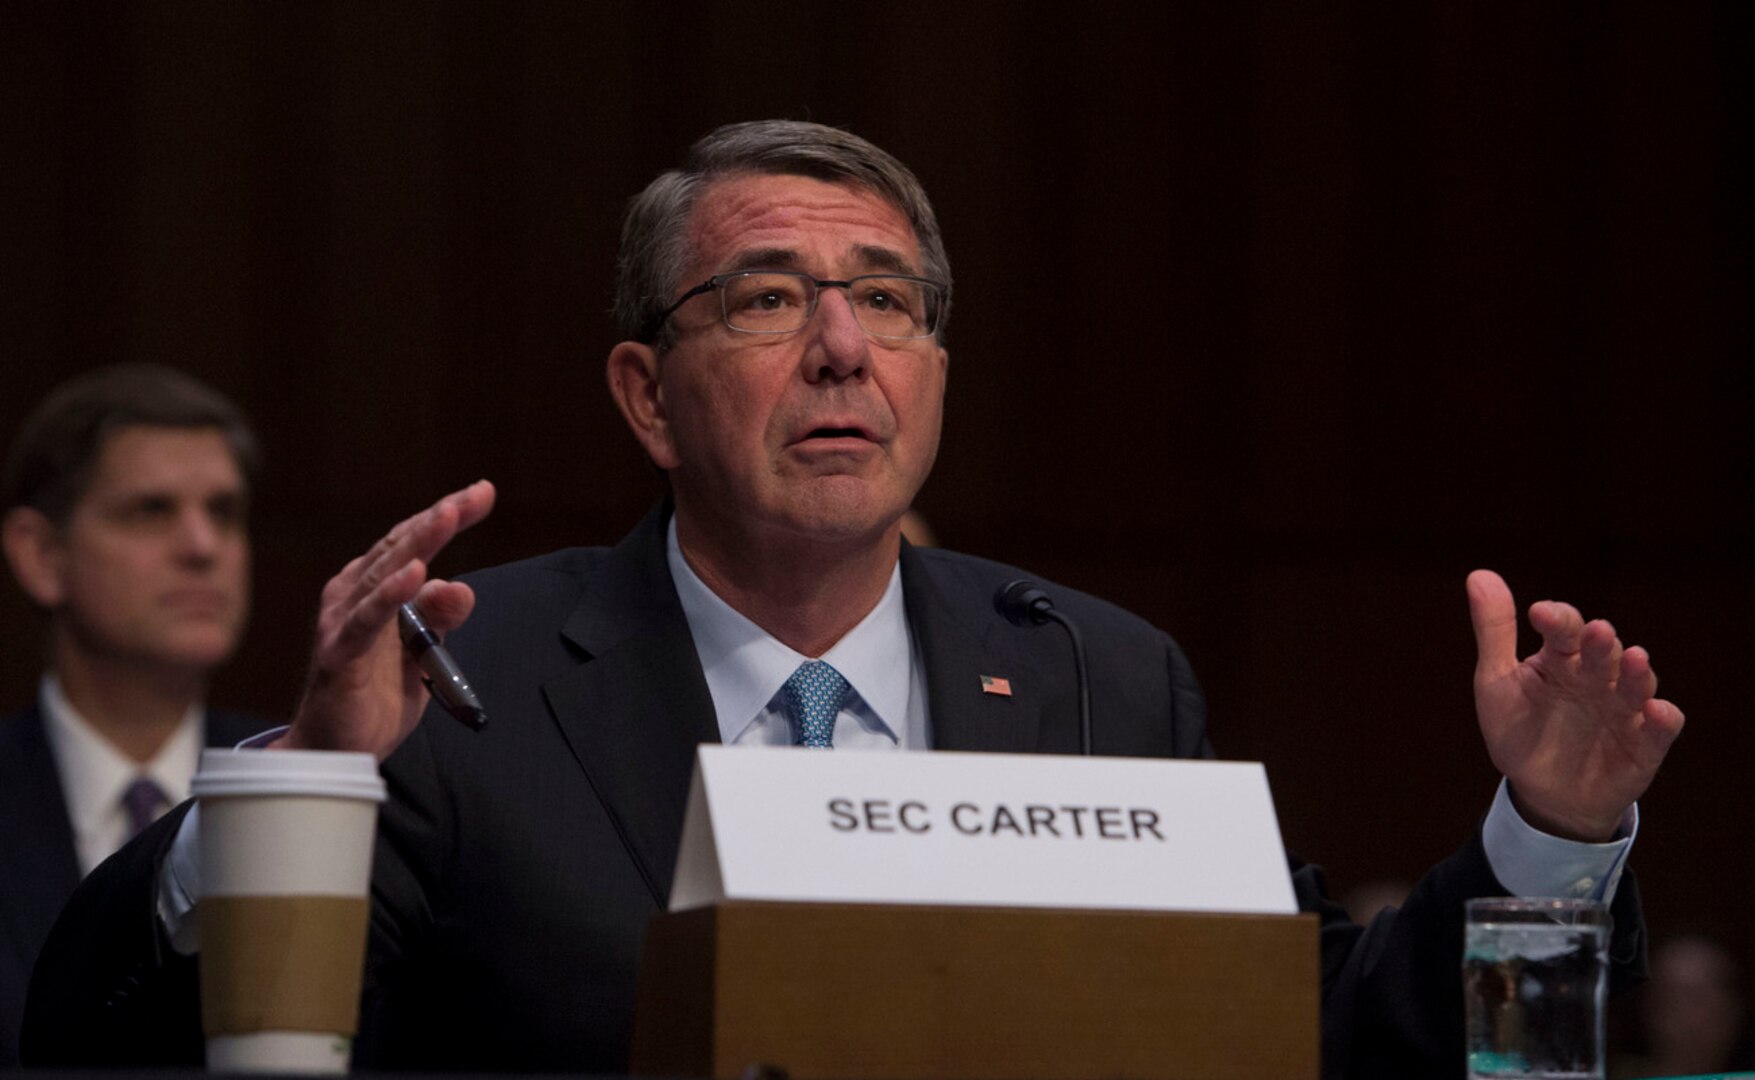 Secretary of Defense Ash Carter provides testimony to the Senate Armed Services Committee on counter-Islamic State of Iraq and the Levant operations and Middle East strategy at the Hart Senate Office Building in Washington D.C., Apr. 28, 2016. (Photo by Senior Master Sgt. Adrian Cadiz)